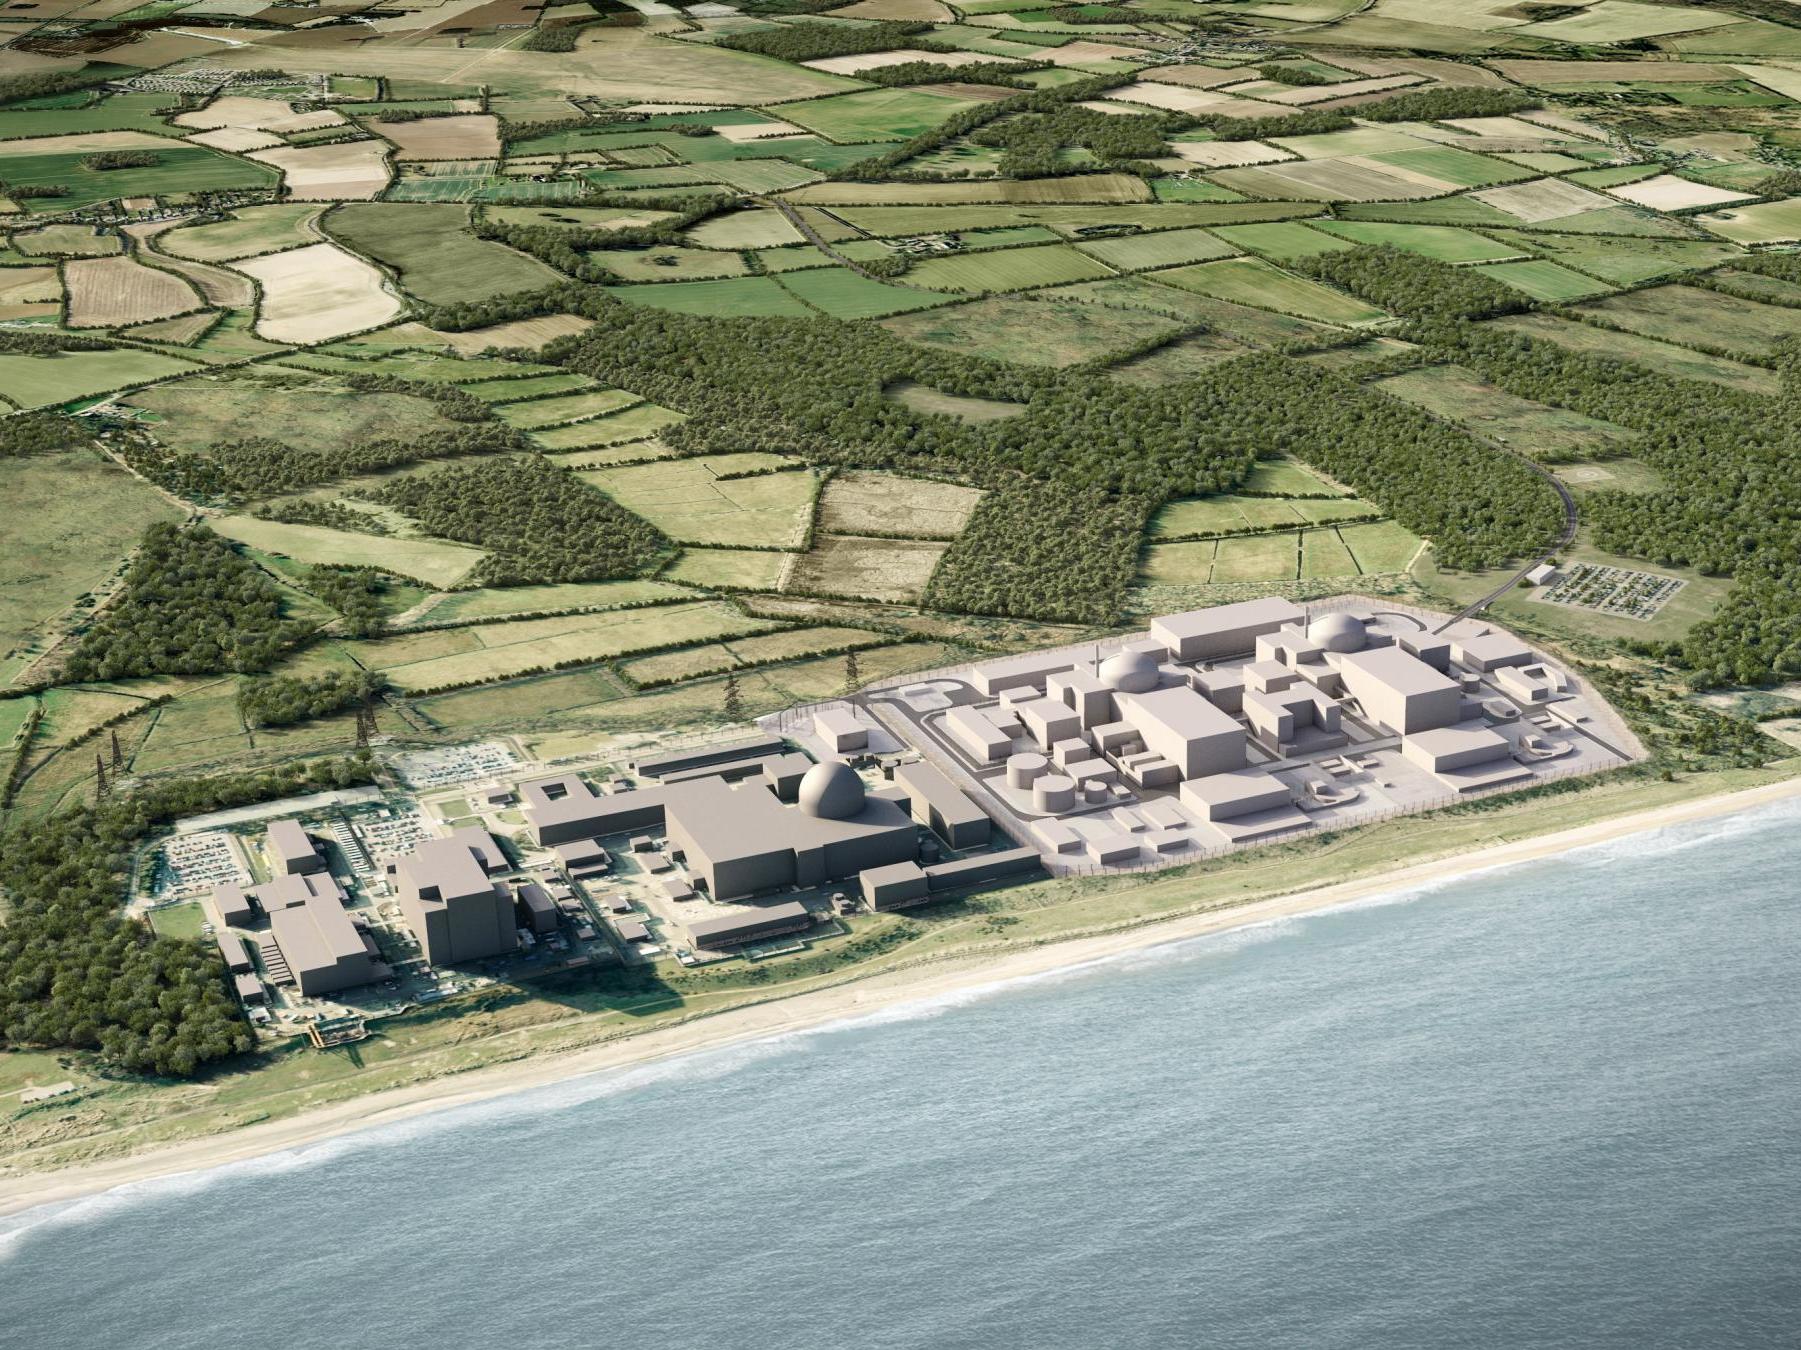 The proposed Sizewell C nuclear power plant would neighbour protected nature reserves